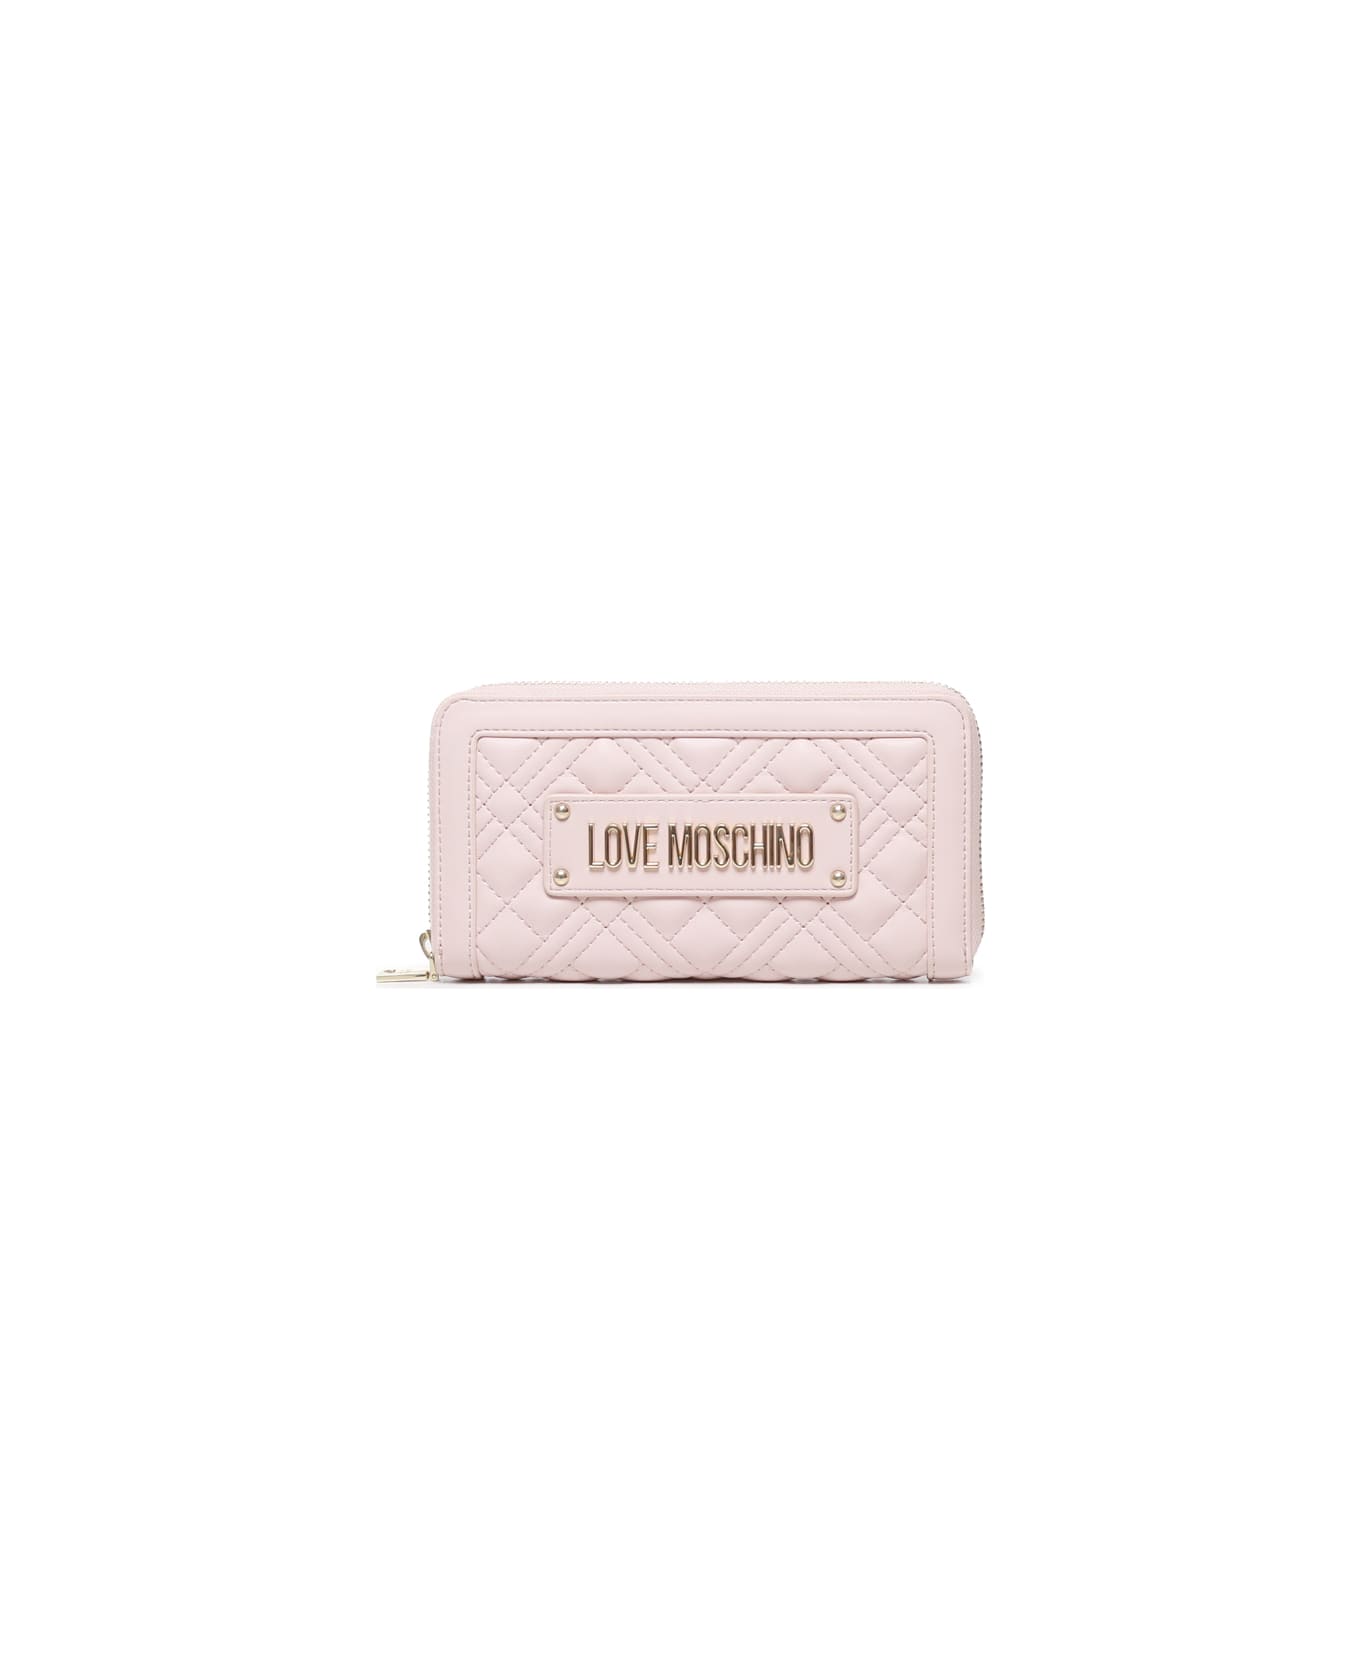 Love Moschino Wallet With Logo - Pink 財布